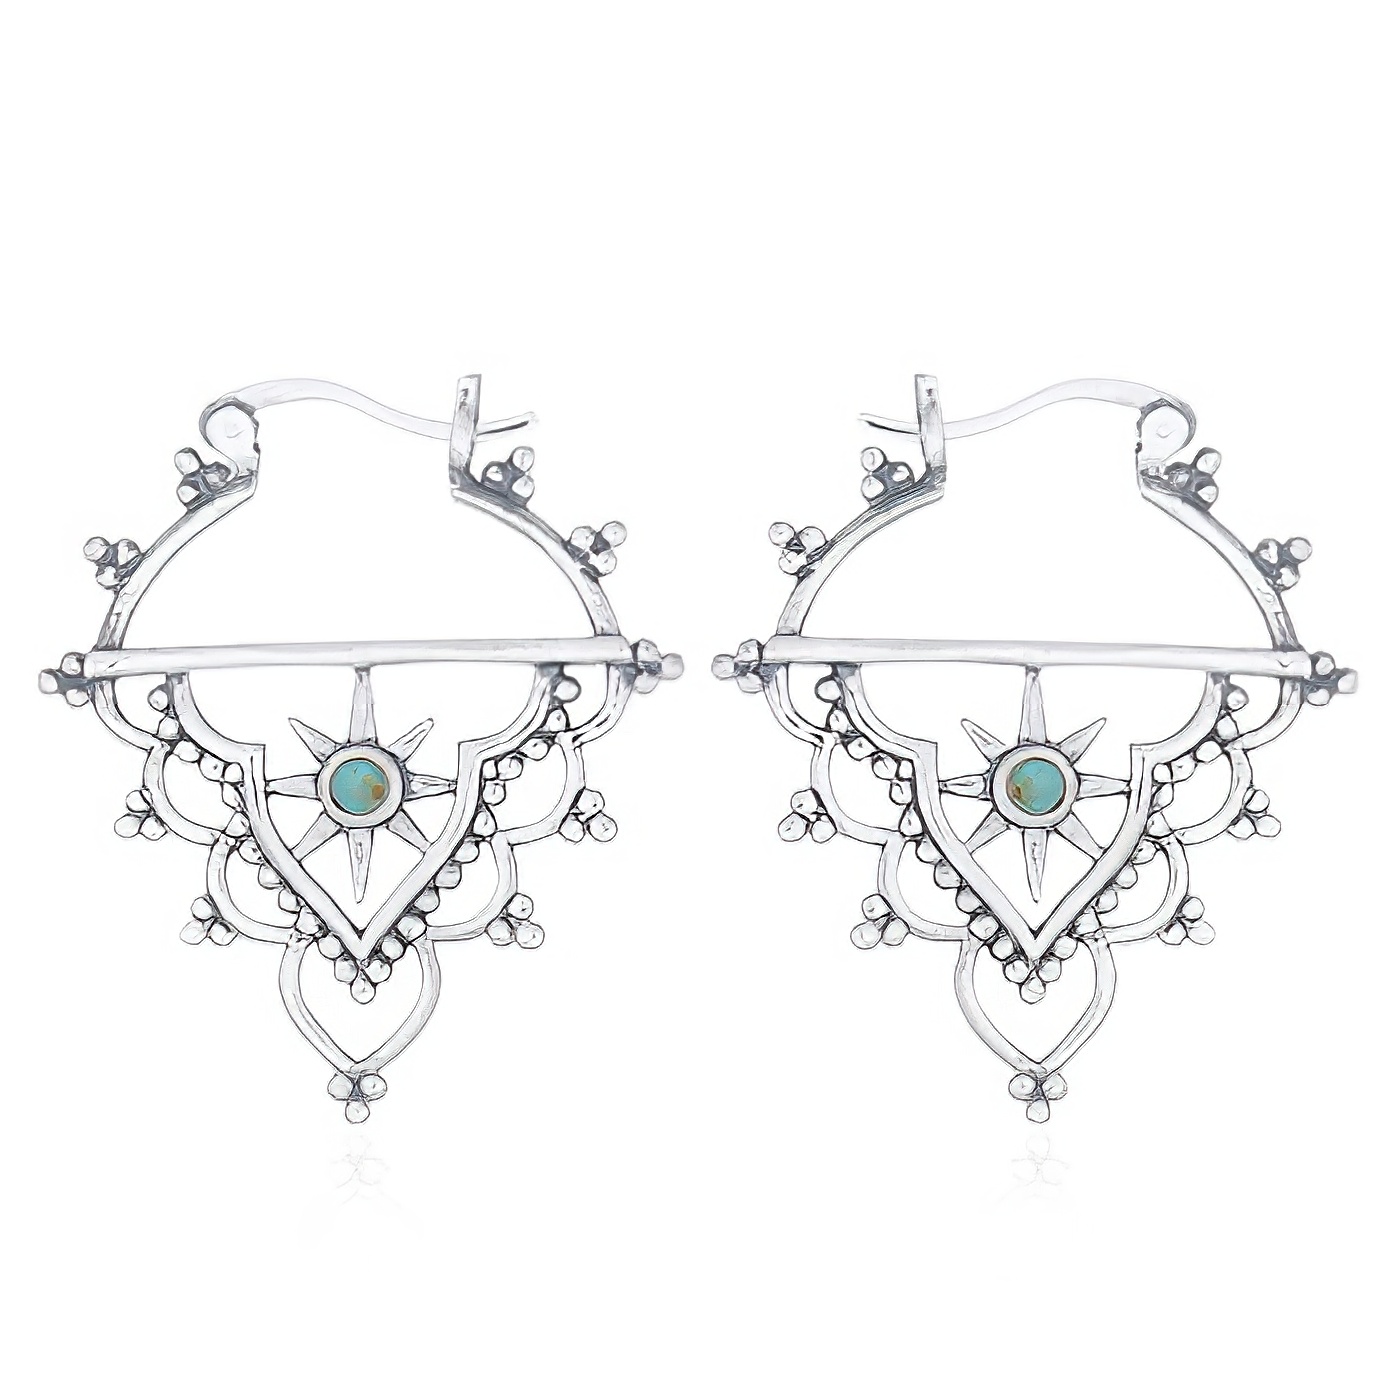 Star Focus Antique Silver Hoop Earrings With Green Constituted Stone by BeYindi 